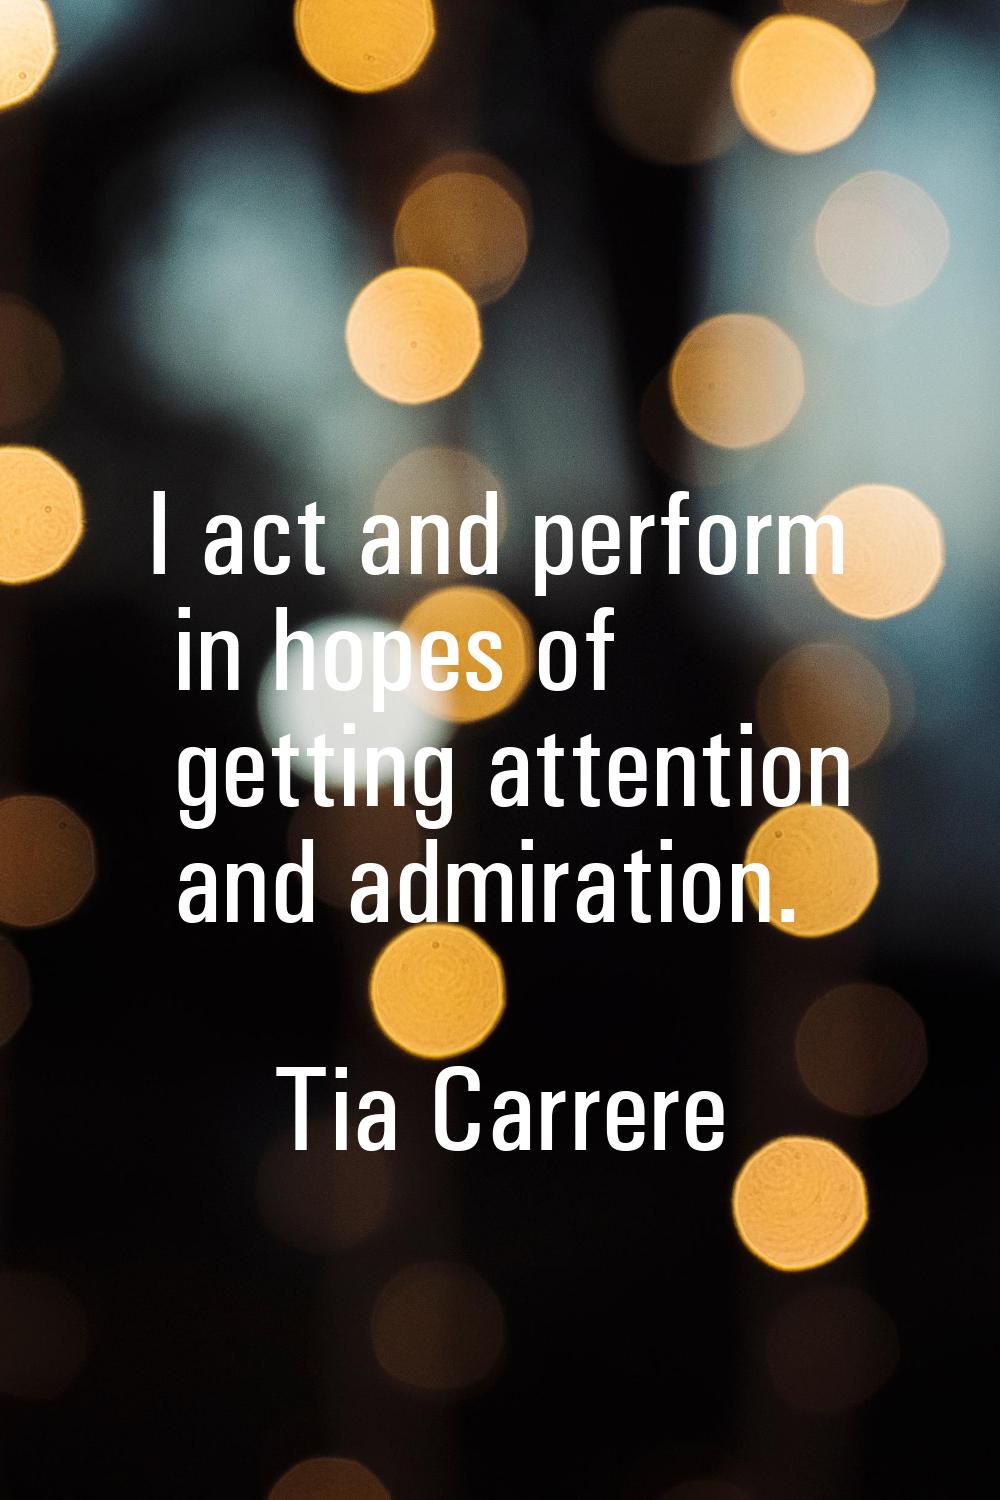 I act and perform in hopes of getting attention and admiration.